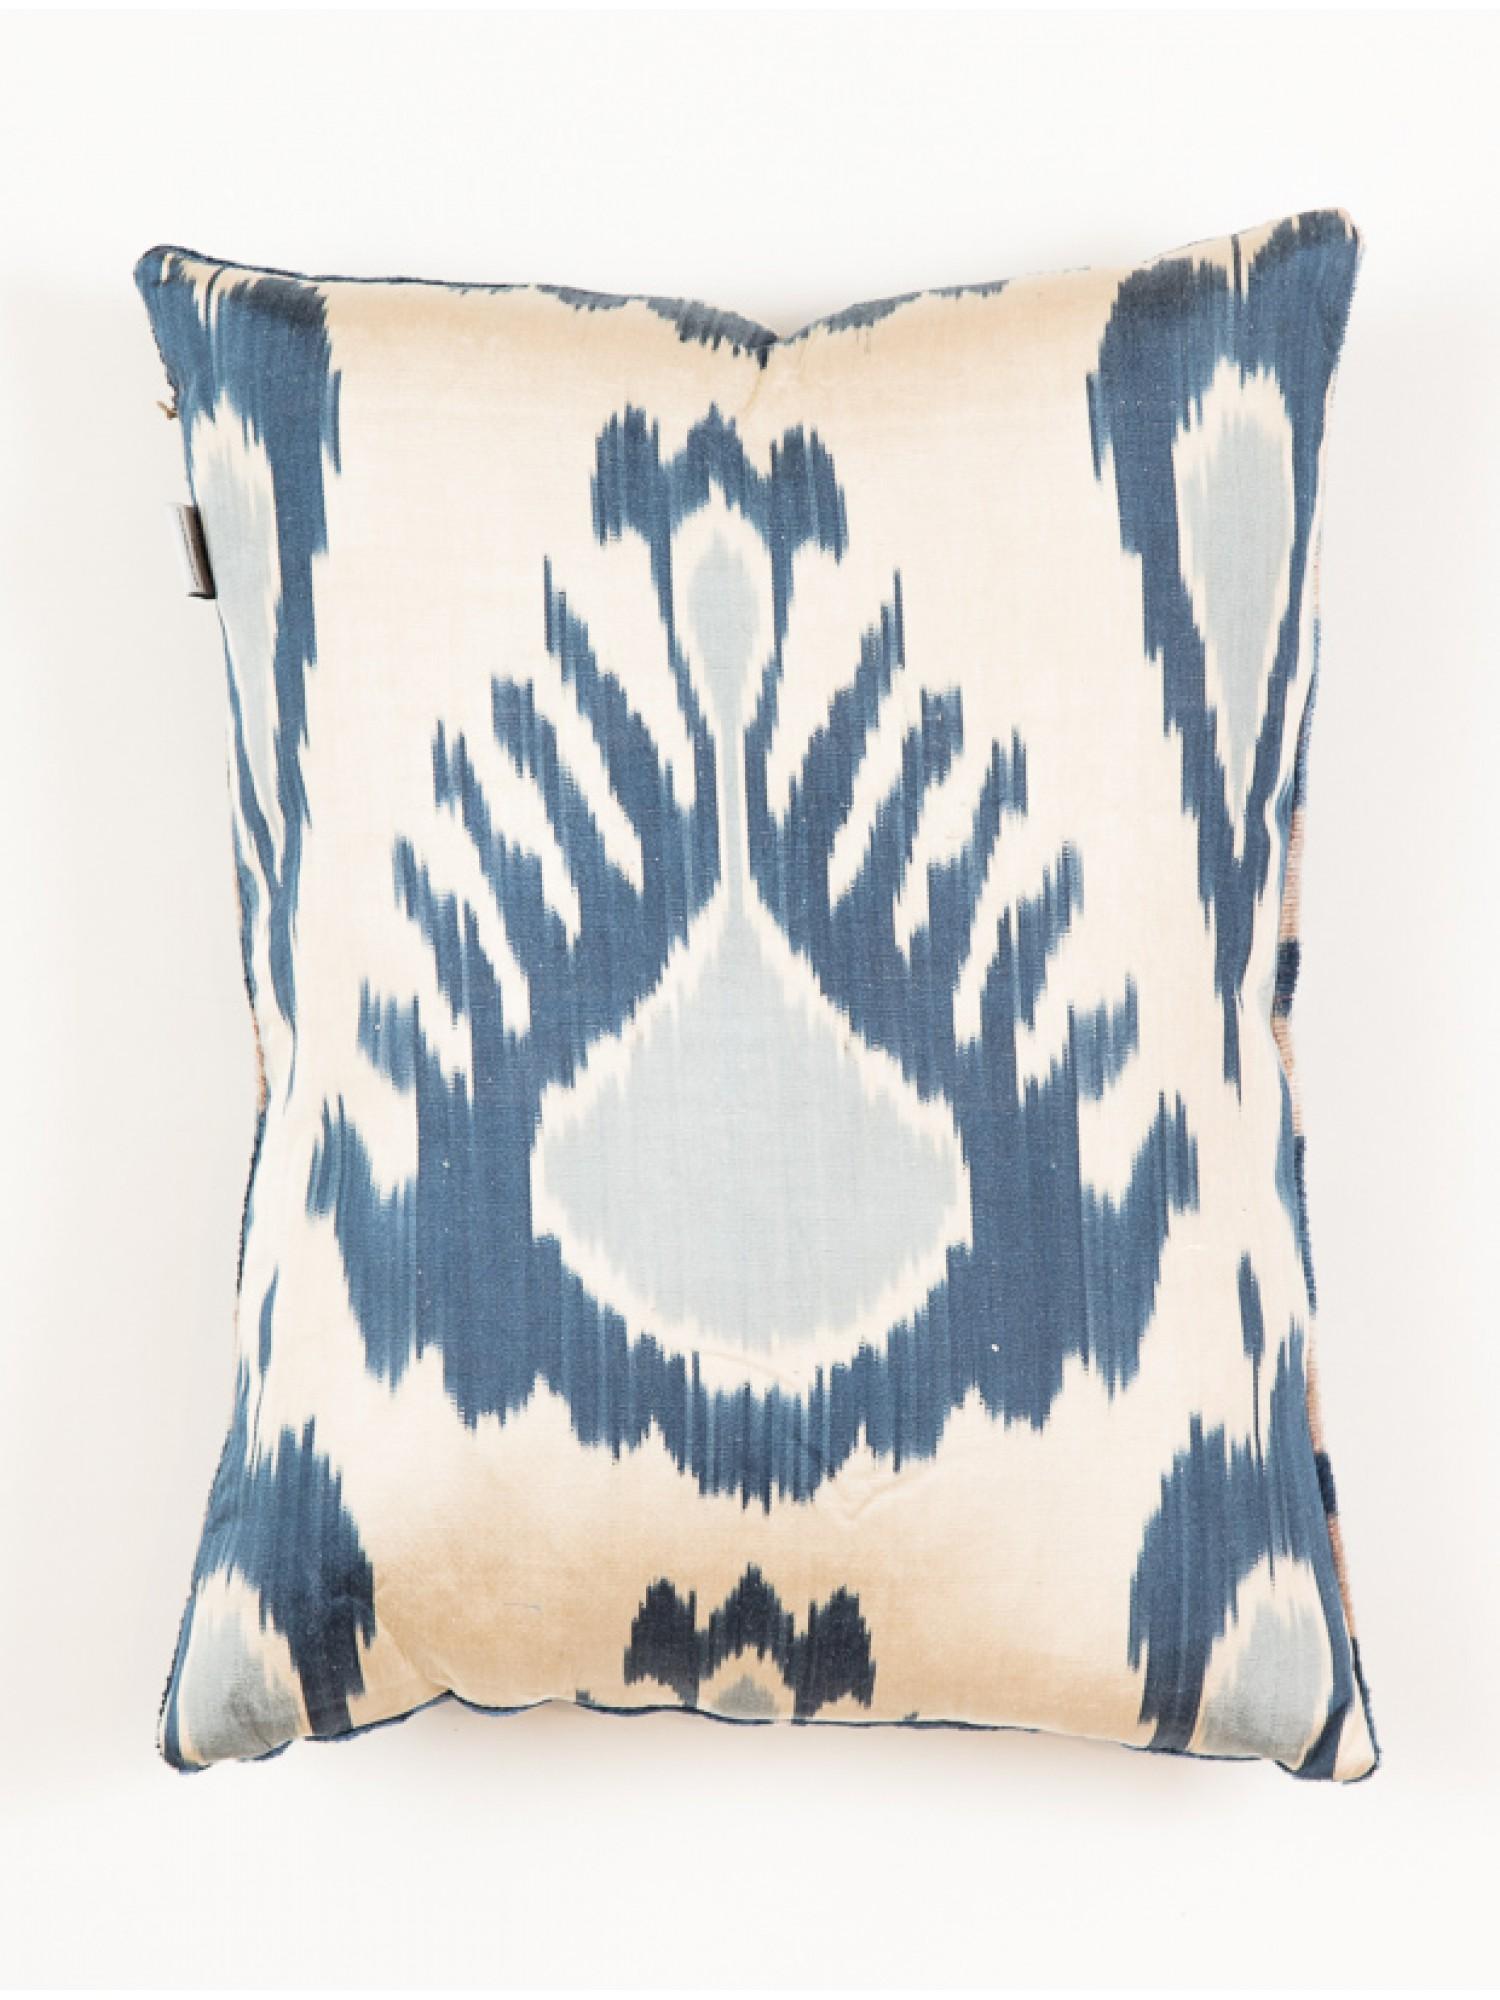 Velvet ikat cushions with rich design and high quality, carefully made one by one in Uzbekistan in Central Asia.

One side is hand-woven silk velvet (velvet), and the other side is hand-woven silk cloth (ikat). All are dyed with natural dyes.
The